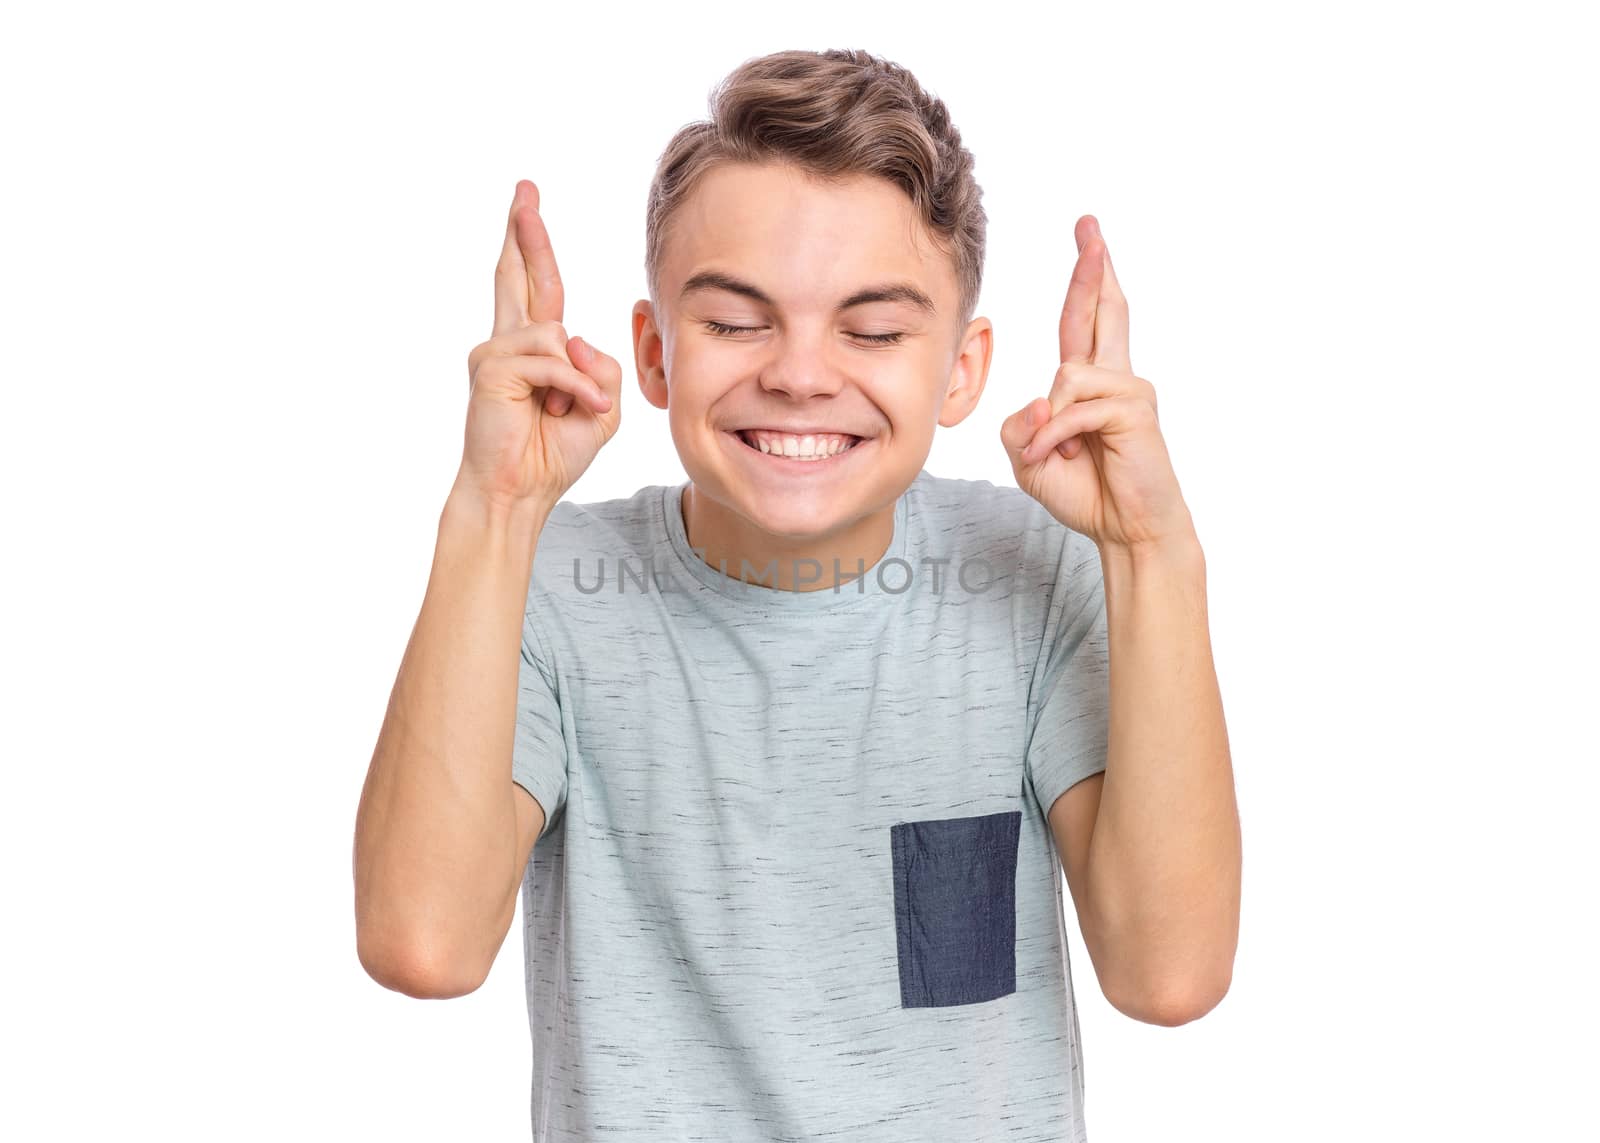 Portrait of teen boy crossing his fingers and wishing for good luck, isolated on white background. Caucasian teenager praying with crossed fingers and eyes closed. Child face expression emotions.